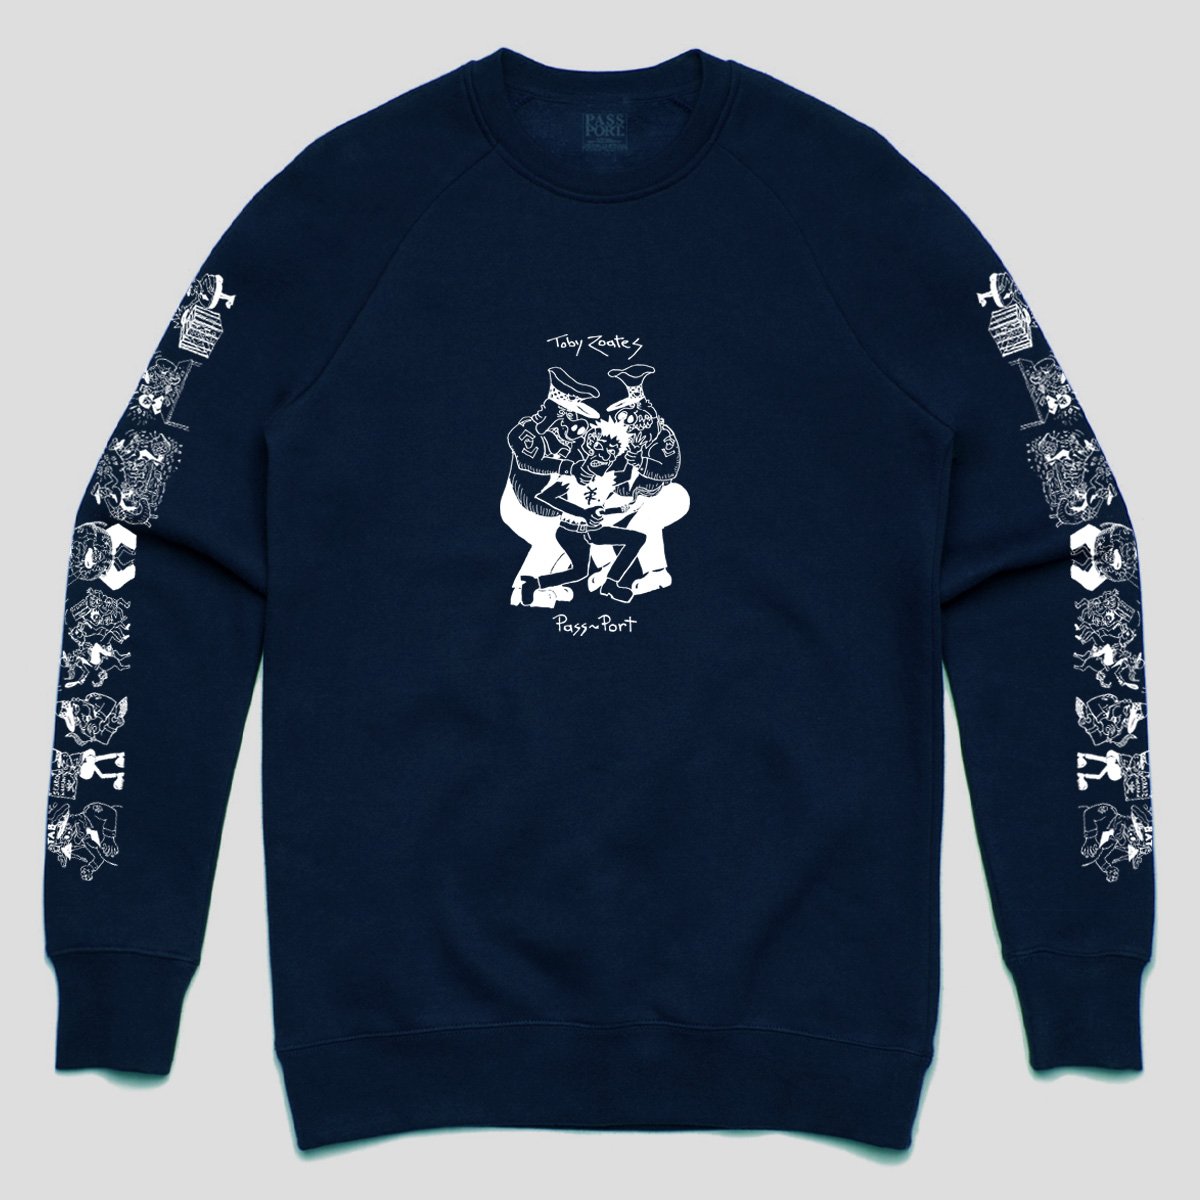 PASS~PORT TOBY ZOATES "COPPERS" SWEATER CLASSIC NAVY